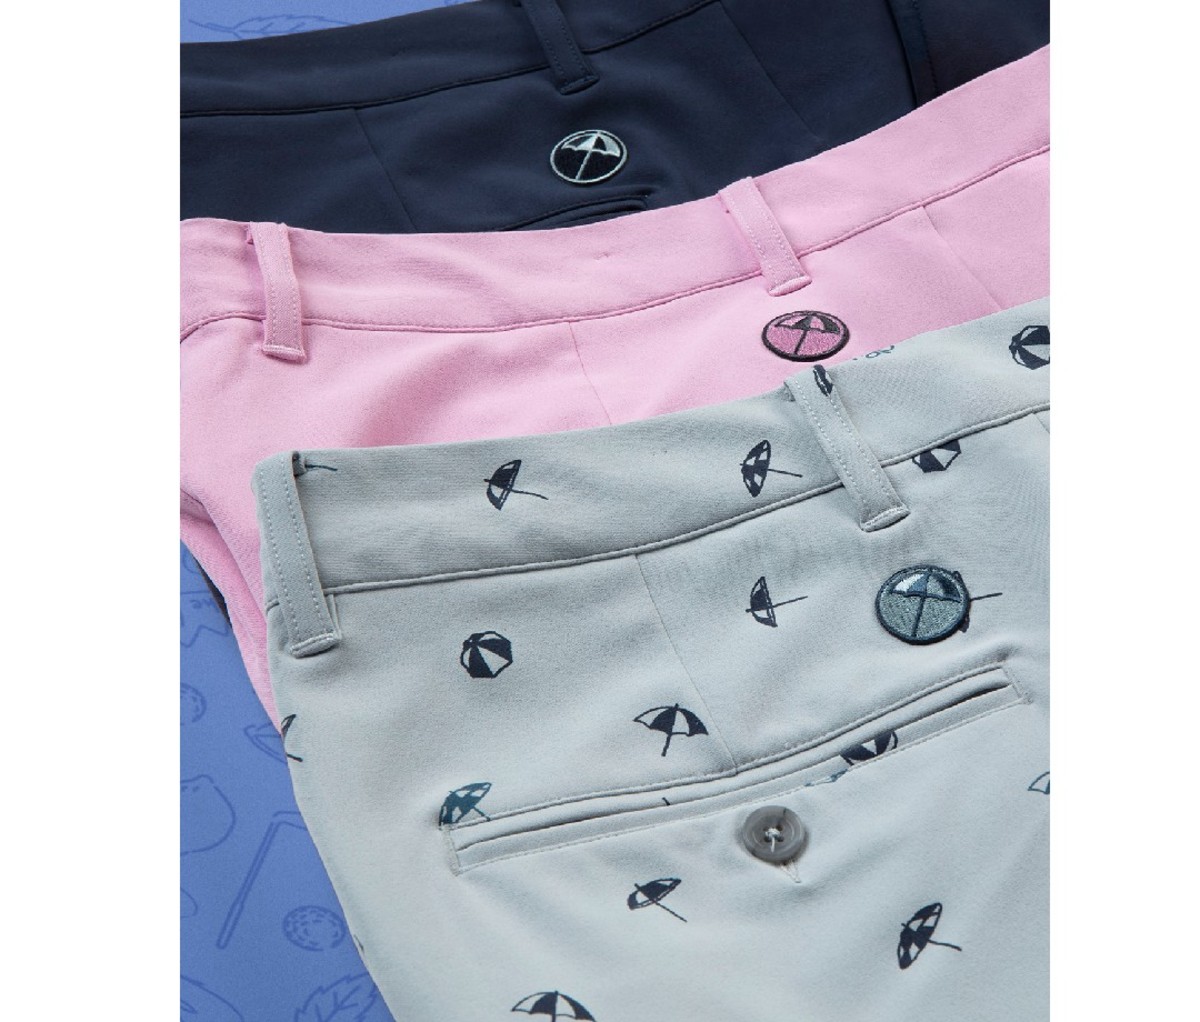 Assortment of Puma golf pants, gray, pink and navy